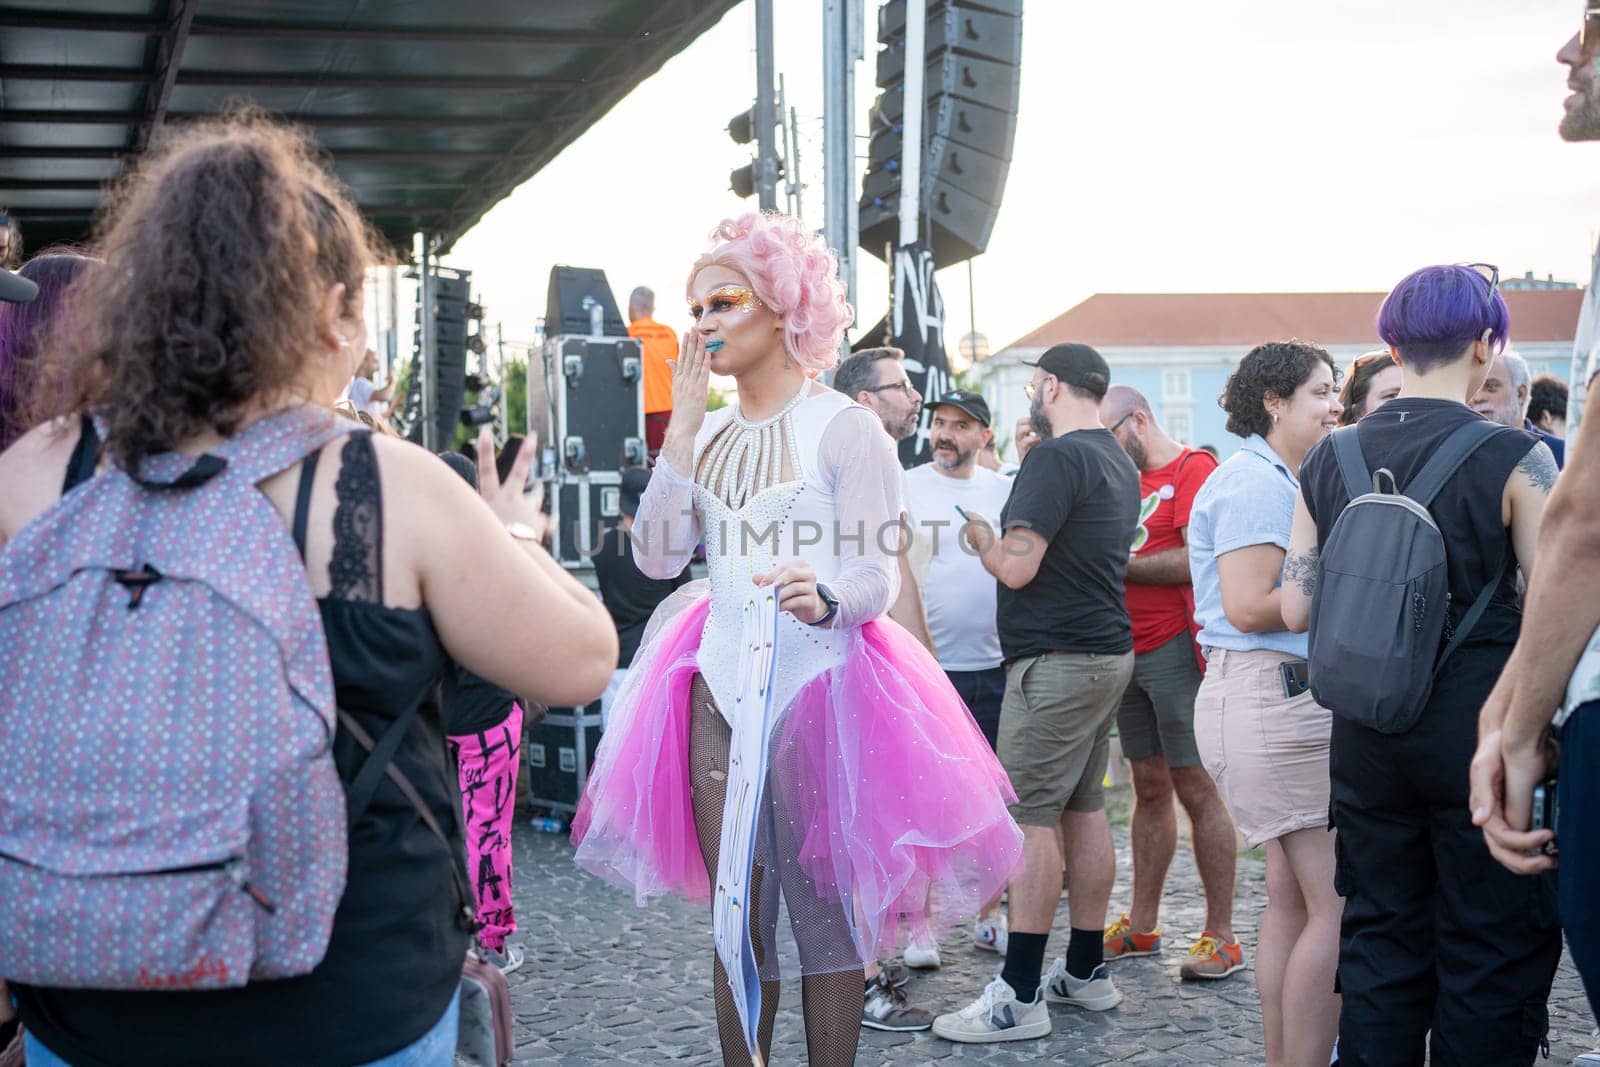 Lisbon, Portugal. 17 June 2023 Drag queen at Pride Parade. European drag queen have fun standing in crowd at Pride Parade. Respect, sexual equality LGBTQAI individuals